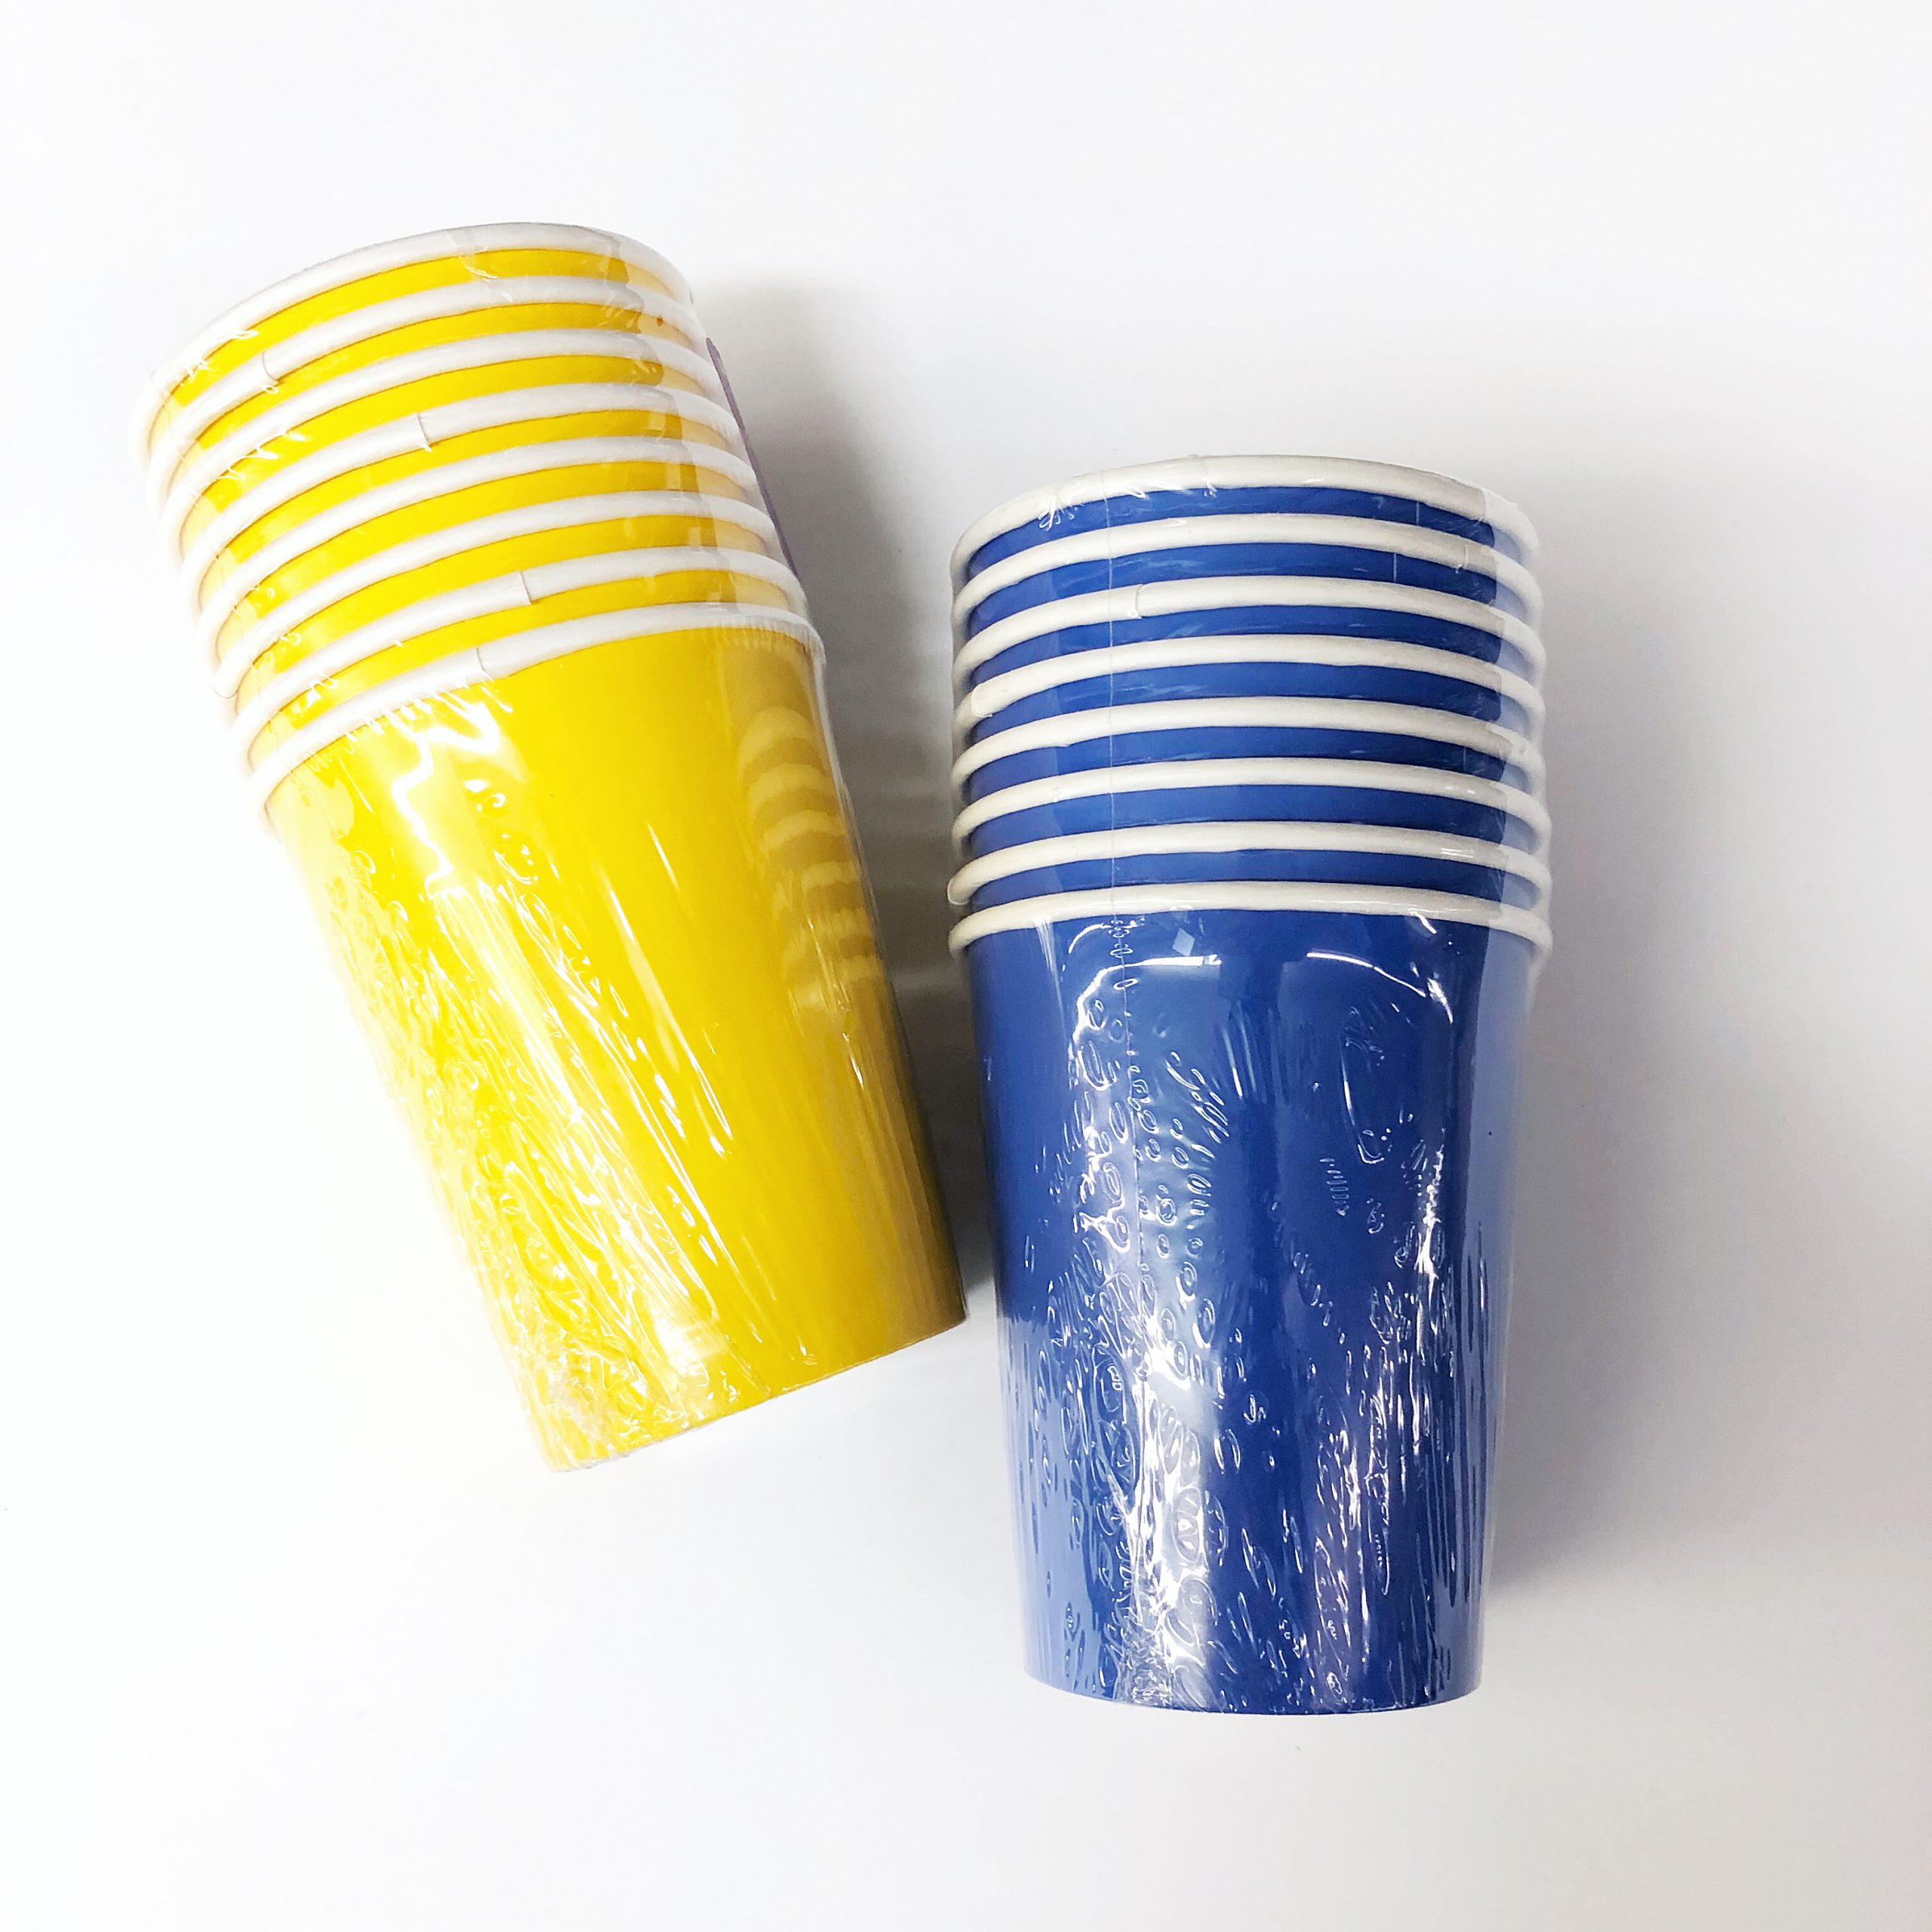 https://www.national5and10.com/wp-content/uploads/2020/05/Blue-Yellow-Paper-Cups-scaled.jpg